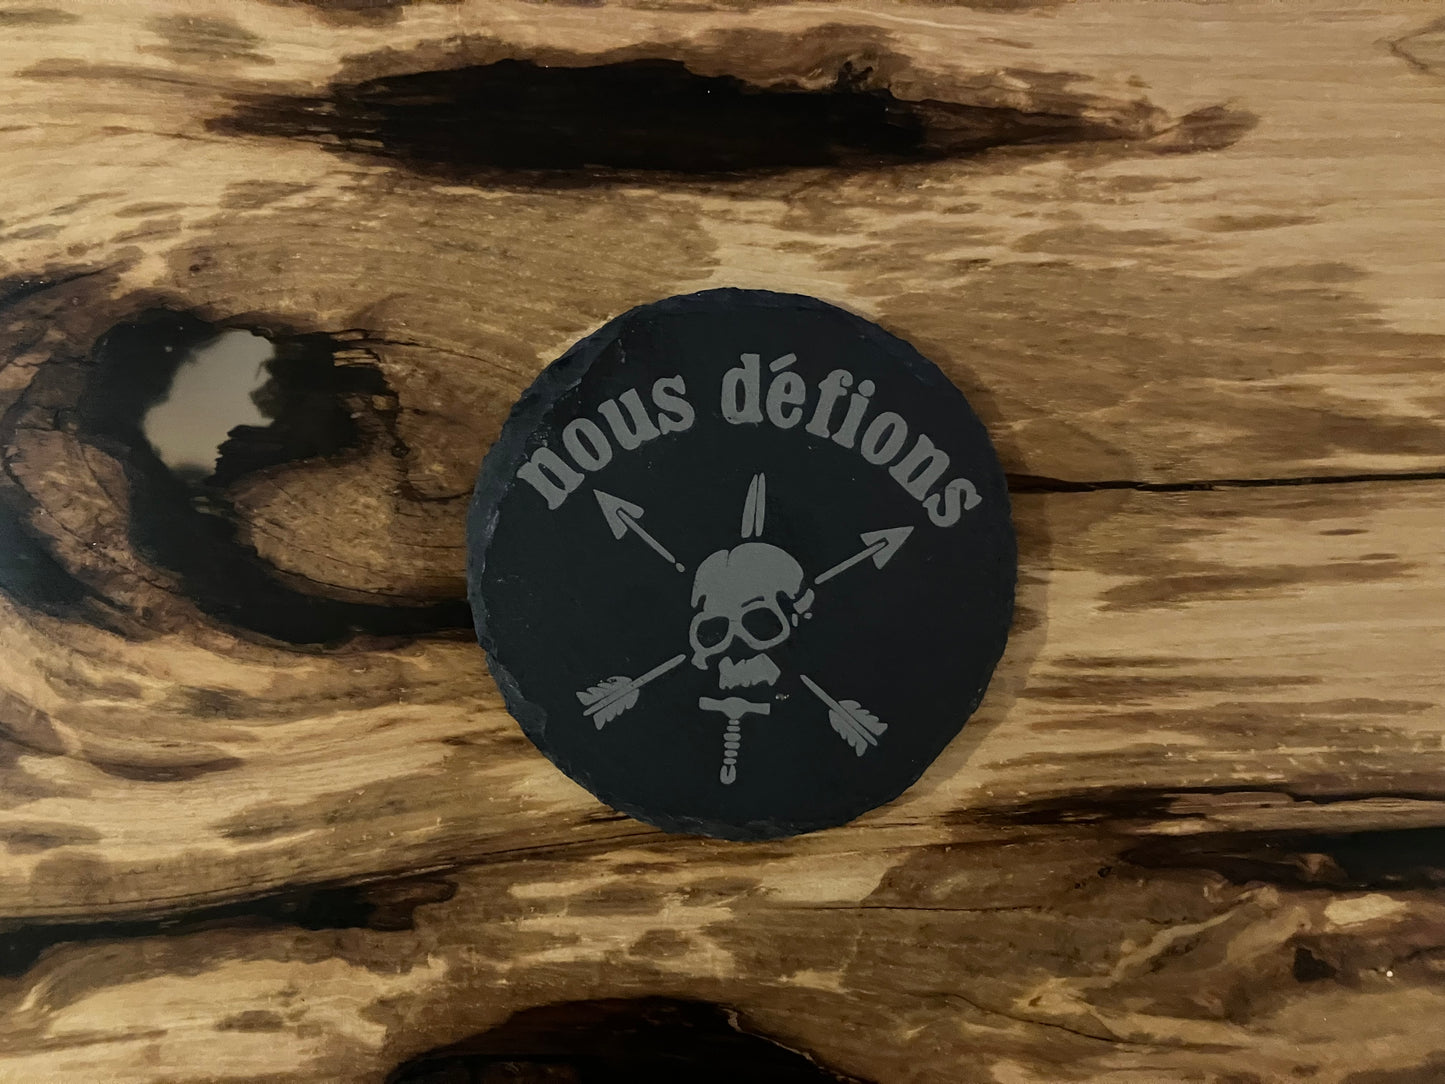 Nous Defions Special Forces Slate Coaster - "We Defy" - Round/Square - 4" Diameter